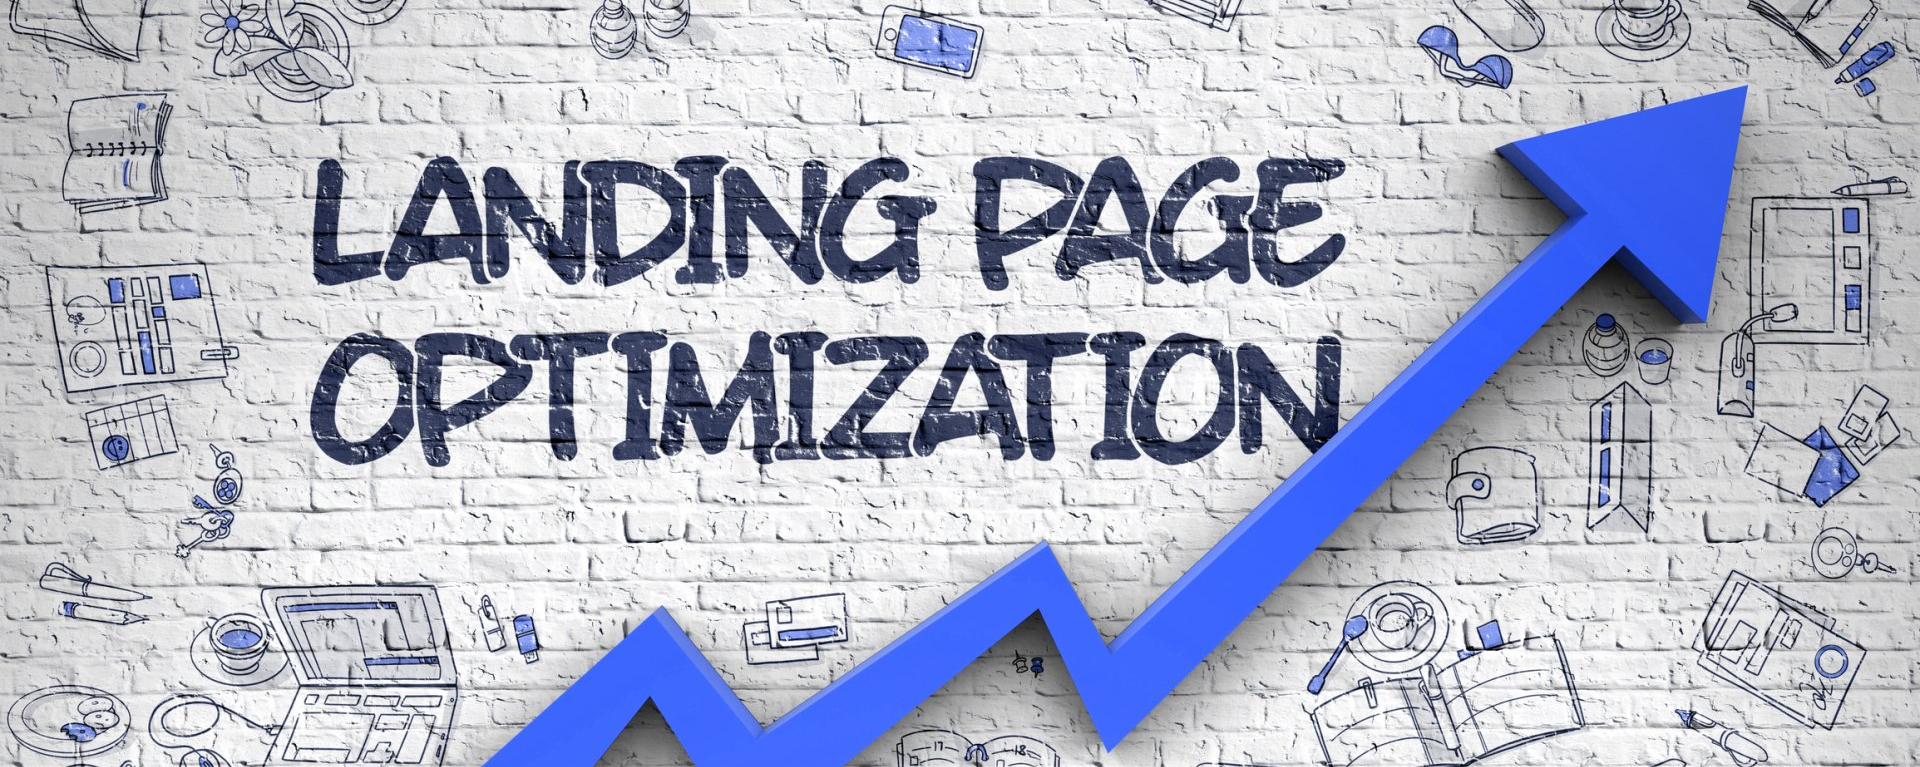 Landing Pages Are Important for Your Lead Generation Strategy